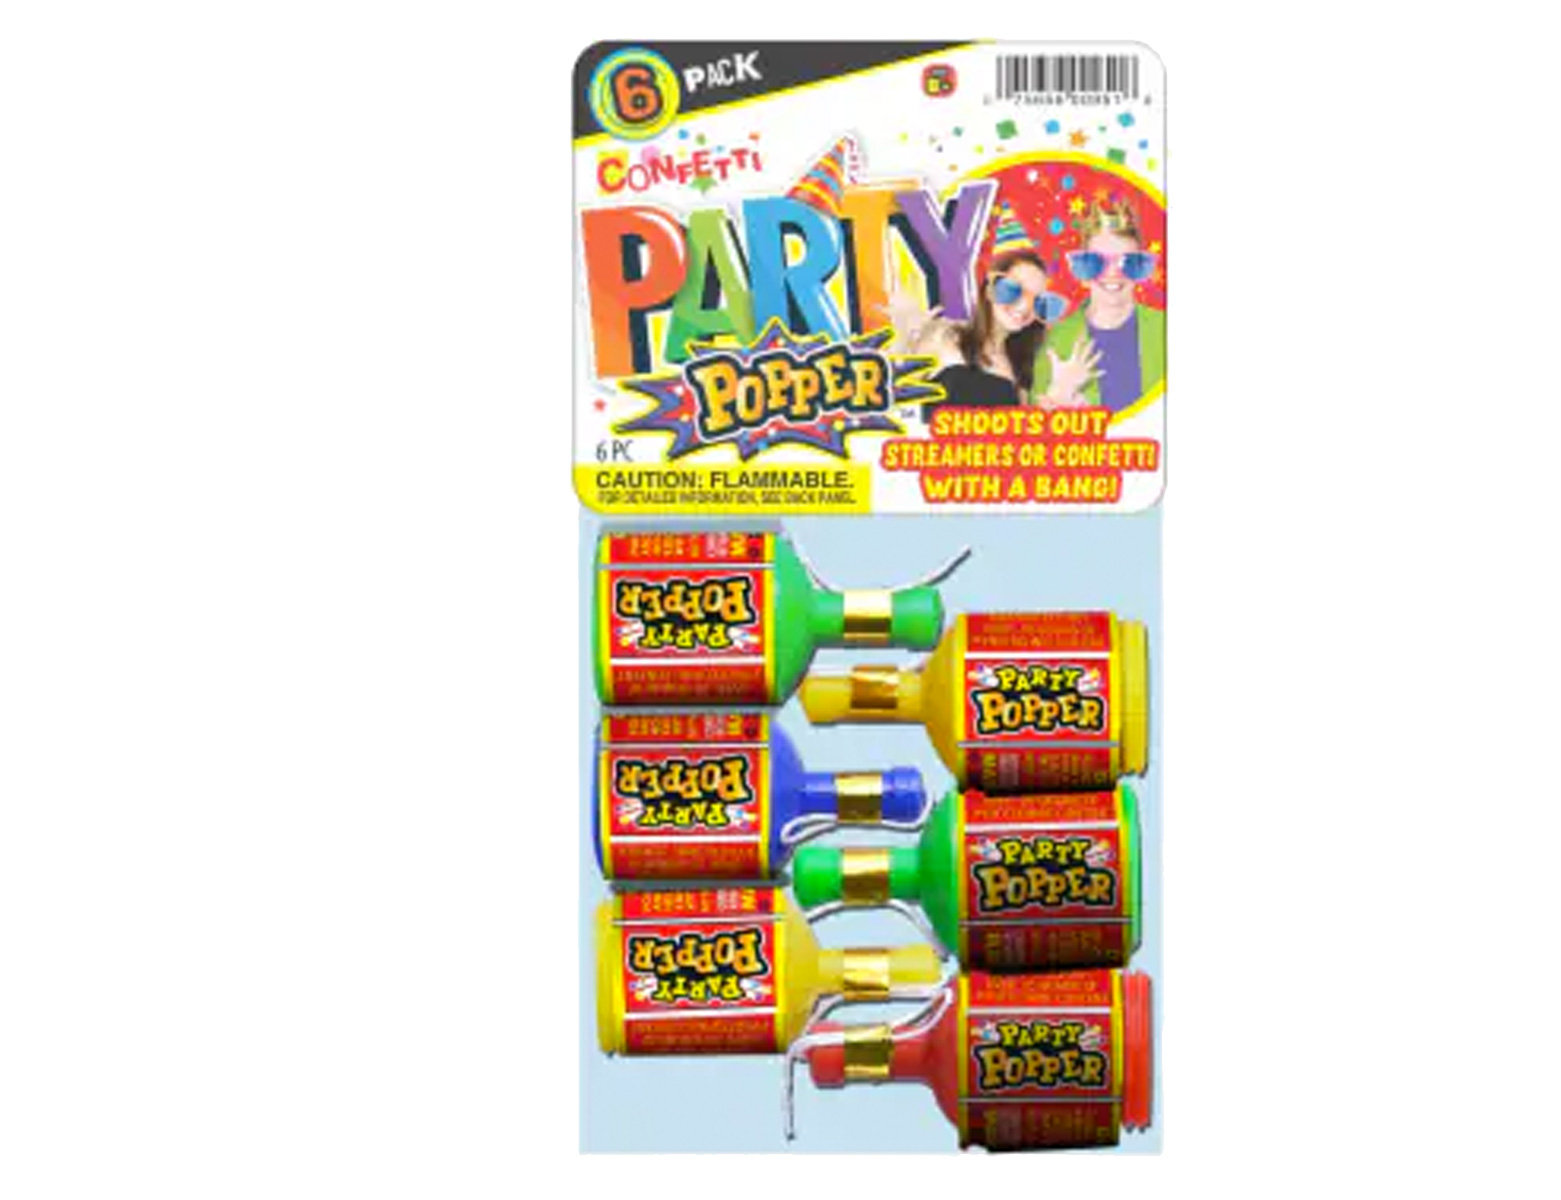 PARTY POPPERS 6PK